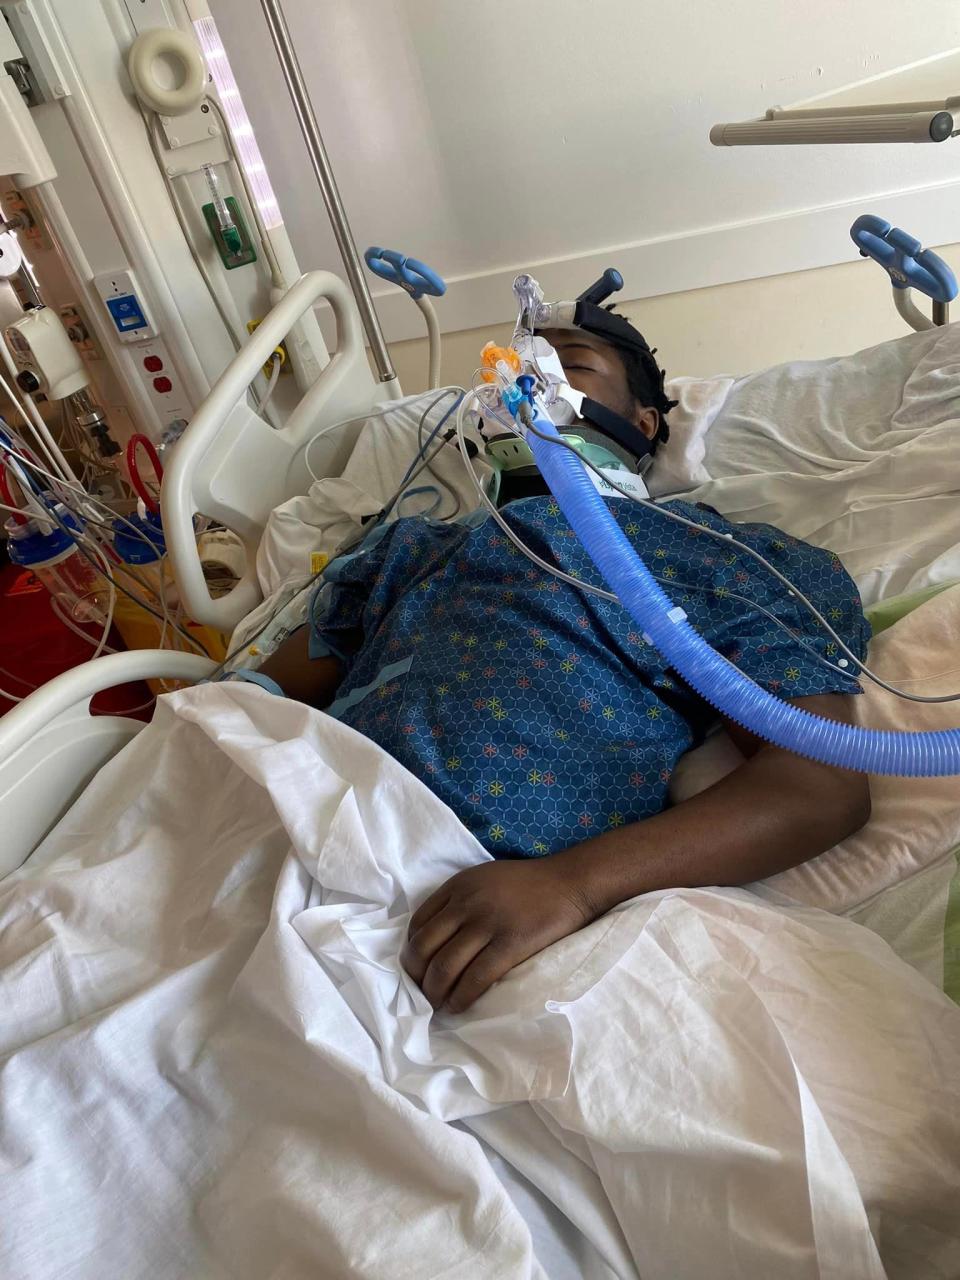 Damarion Allen, 15, was paralyzed from the waist down in an altercation at the Franklin County Juvenile Detention Center on May 7.